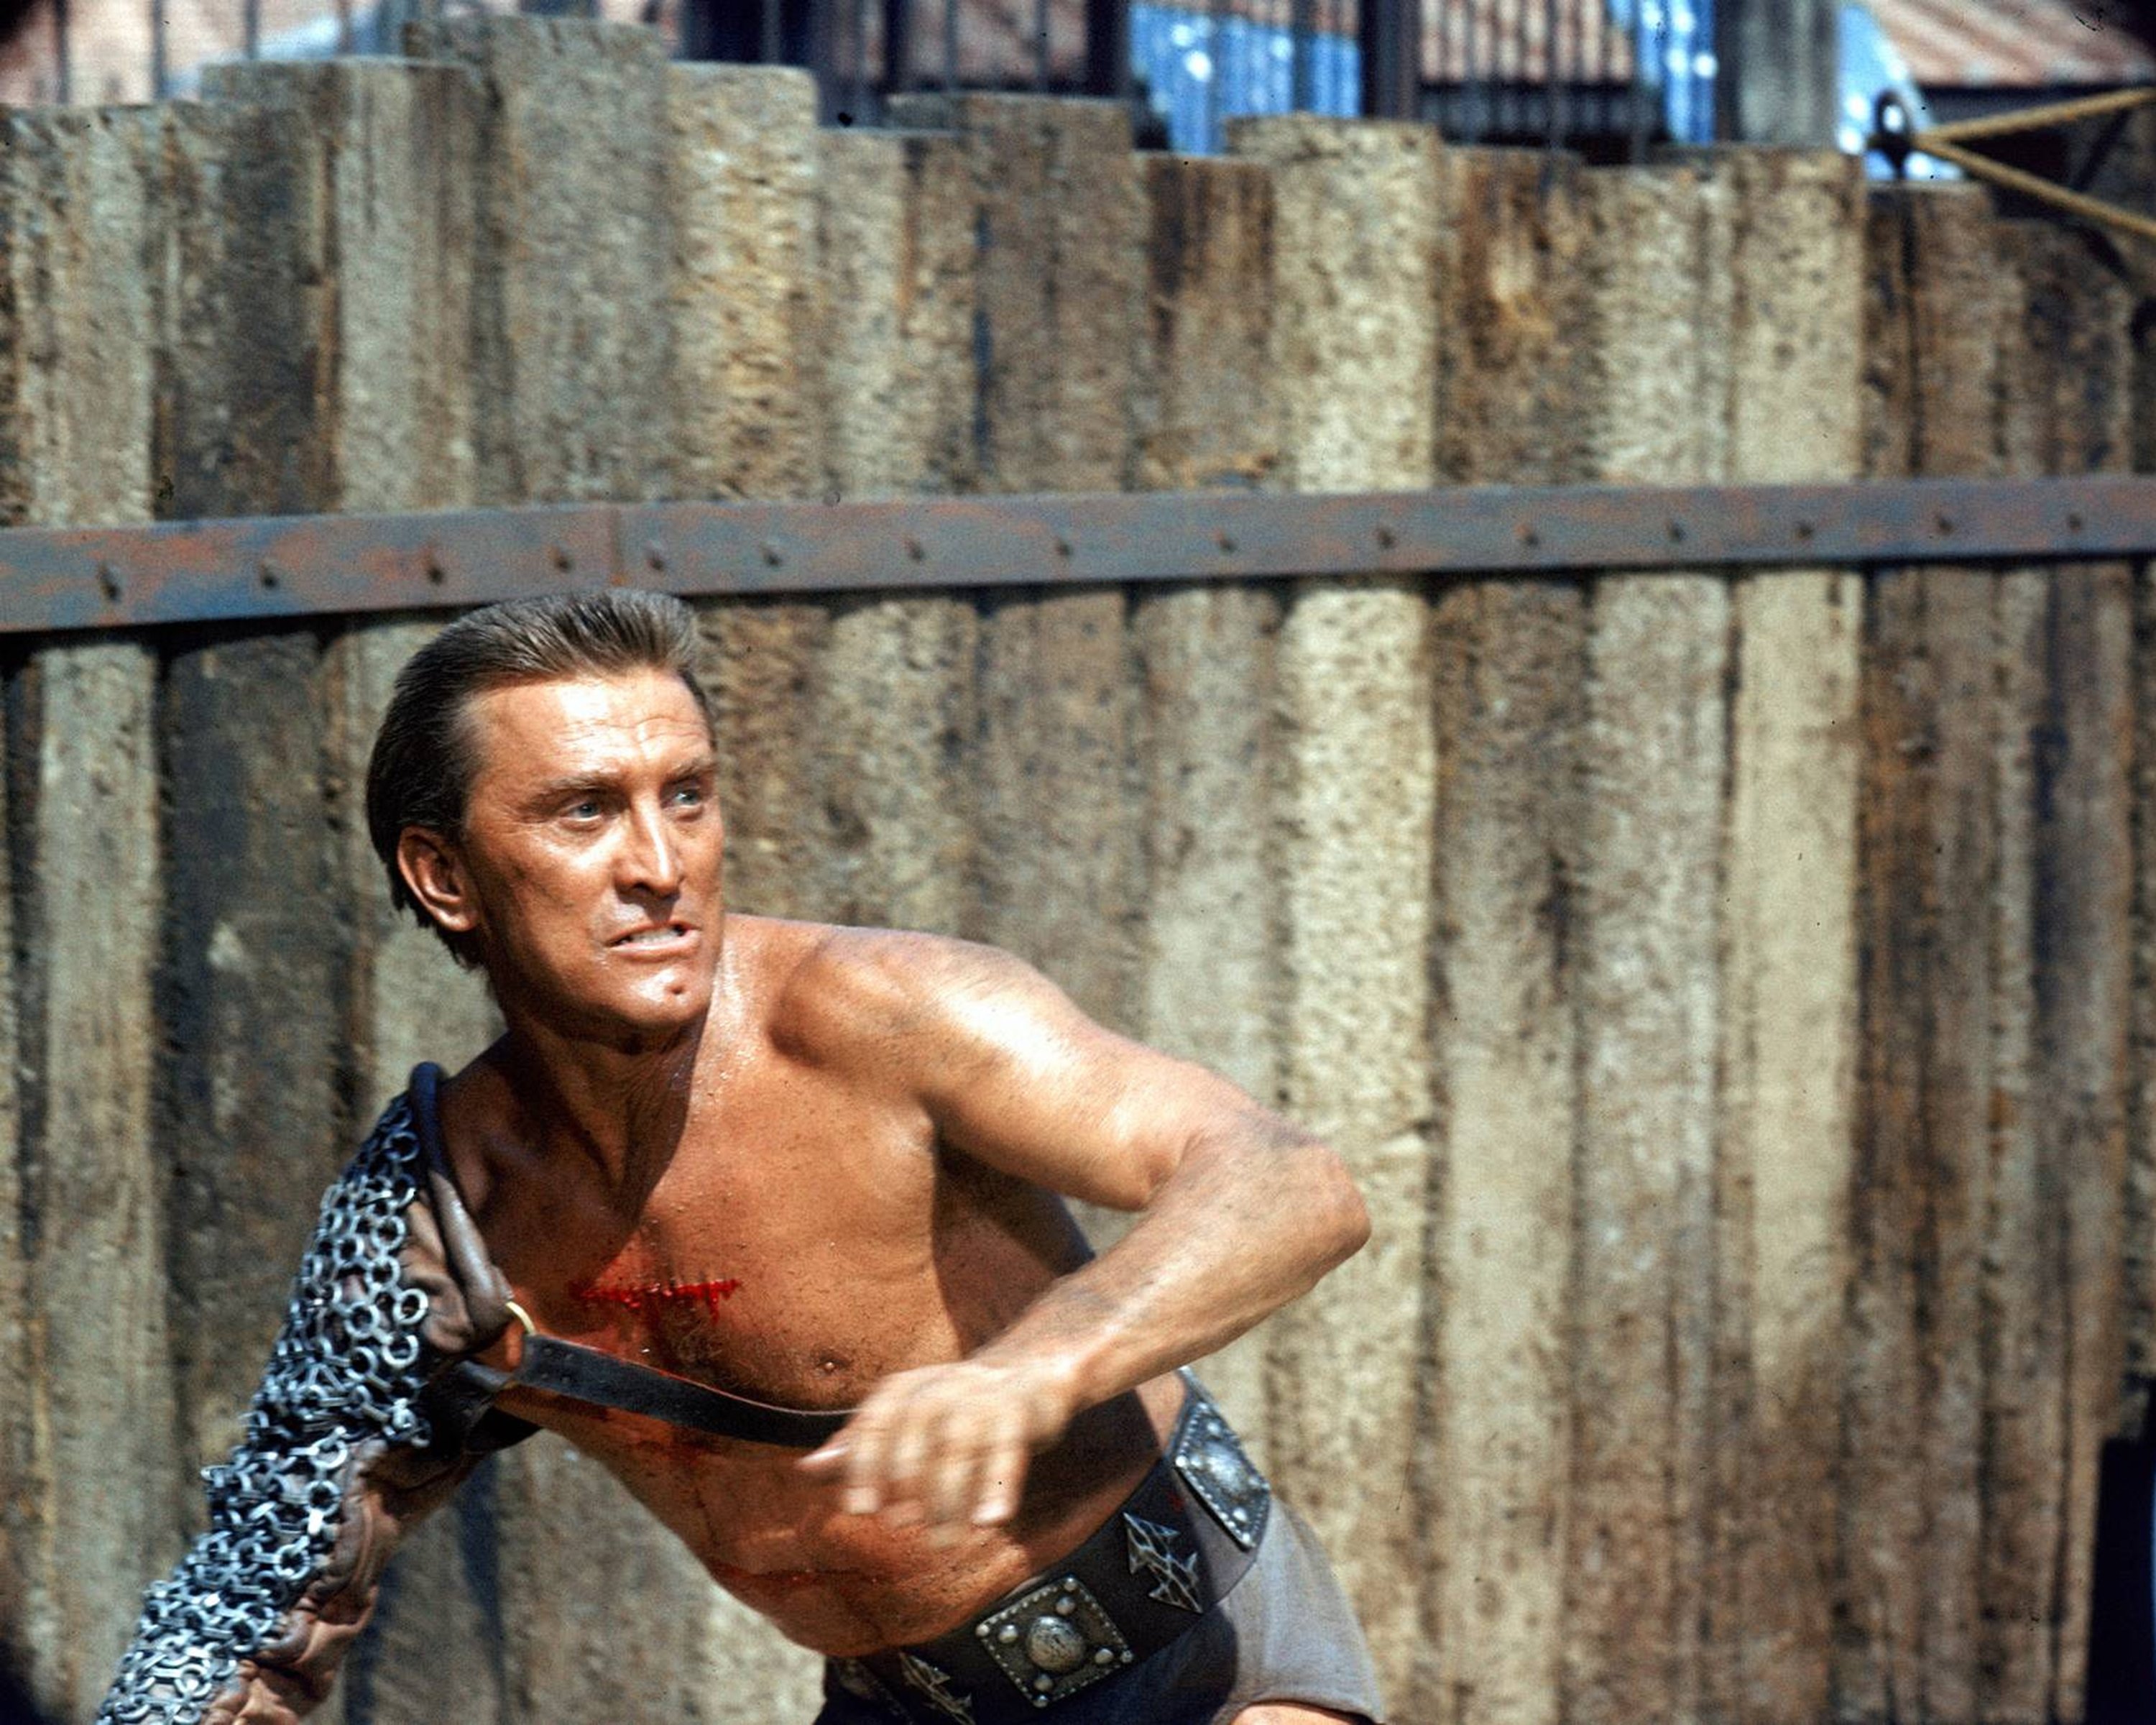 Kirk Douglas in the film "Spartacus" 1960. | Source: Getty Images